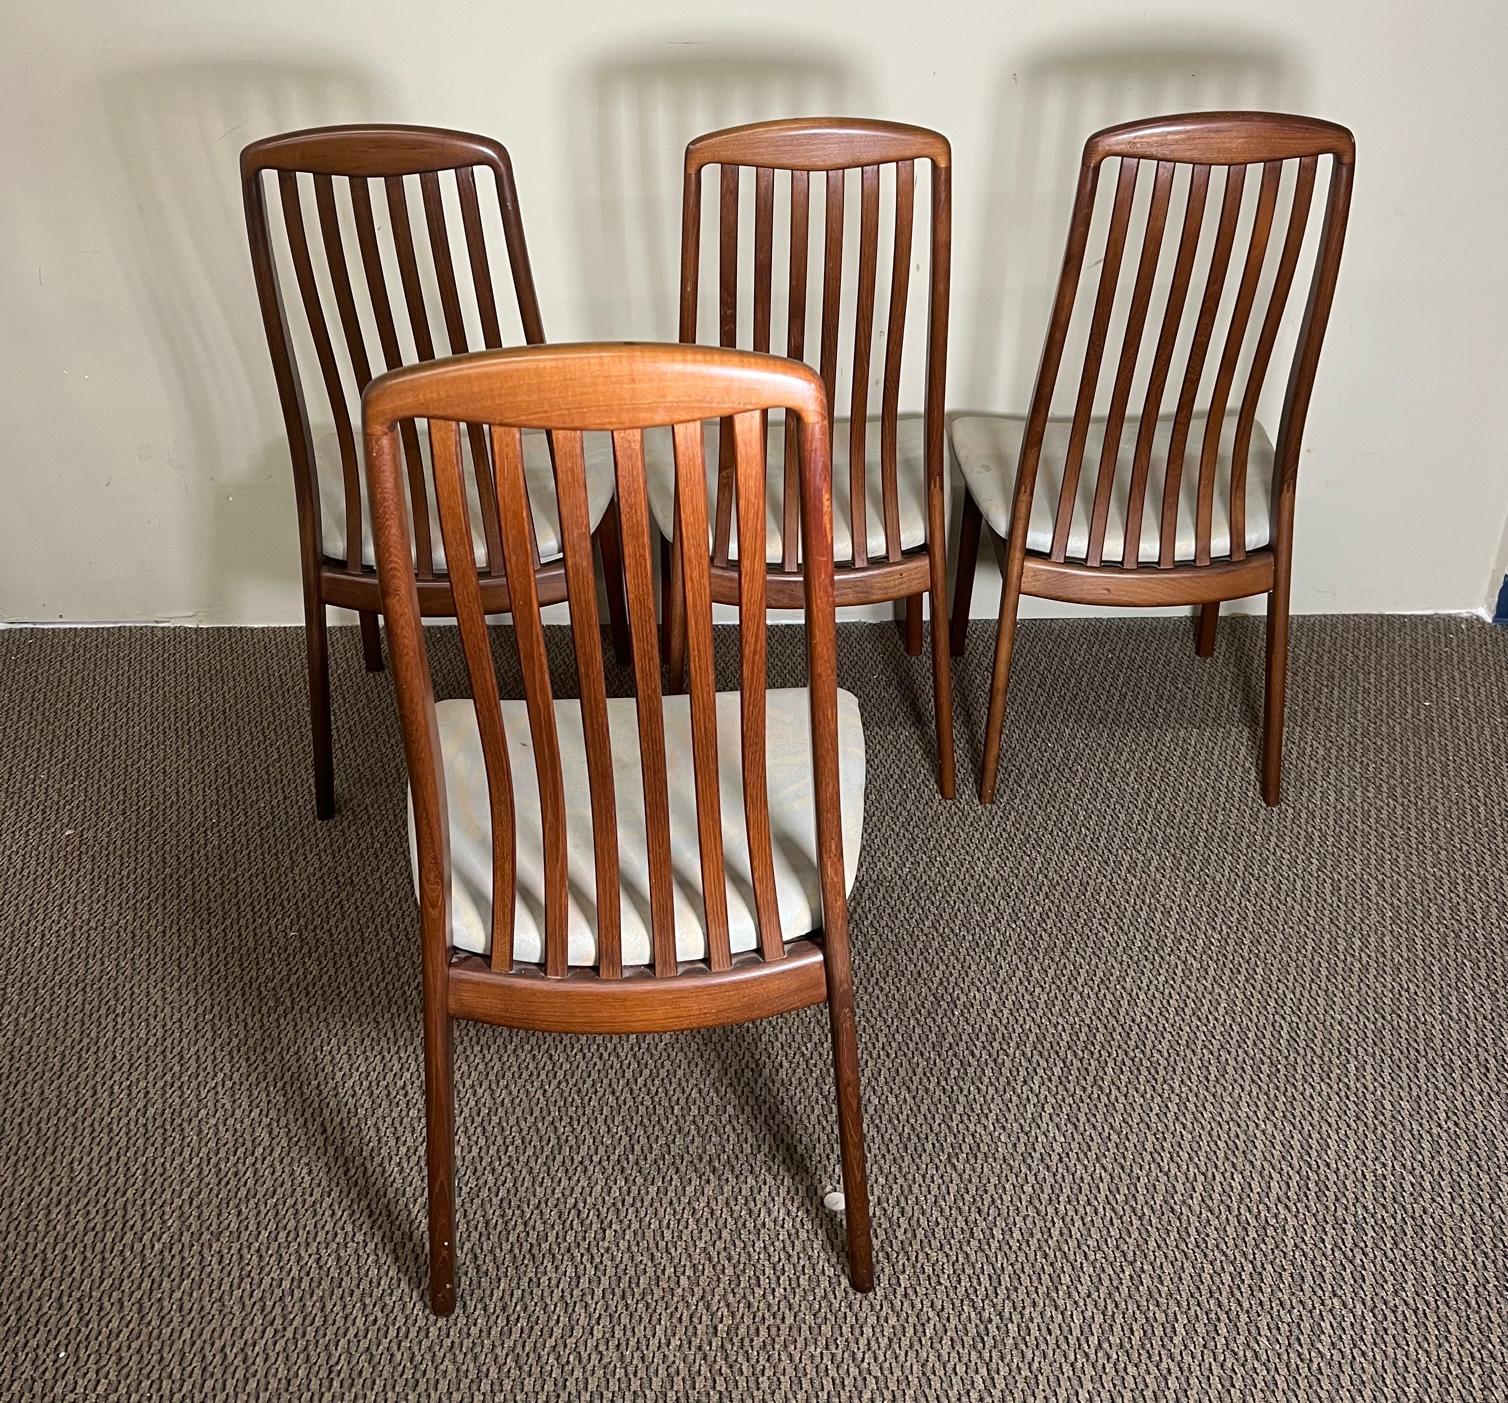 Set of 4 mahogany dining chairs by Schou Andersen. Made in Denmark. 
Very good condition. Minor marks on the teak frames. Very sturdy. Upholstery faded and not original. Could easily be reupholstered to match your decor.

Dimensions: 19.5